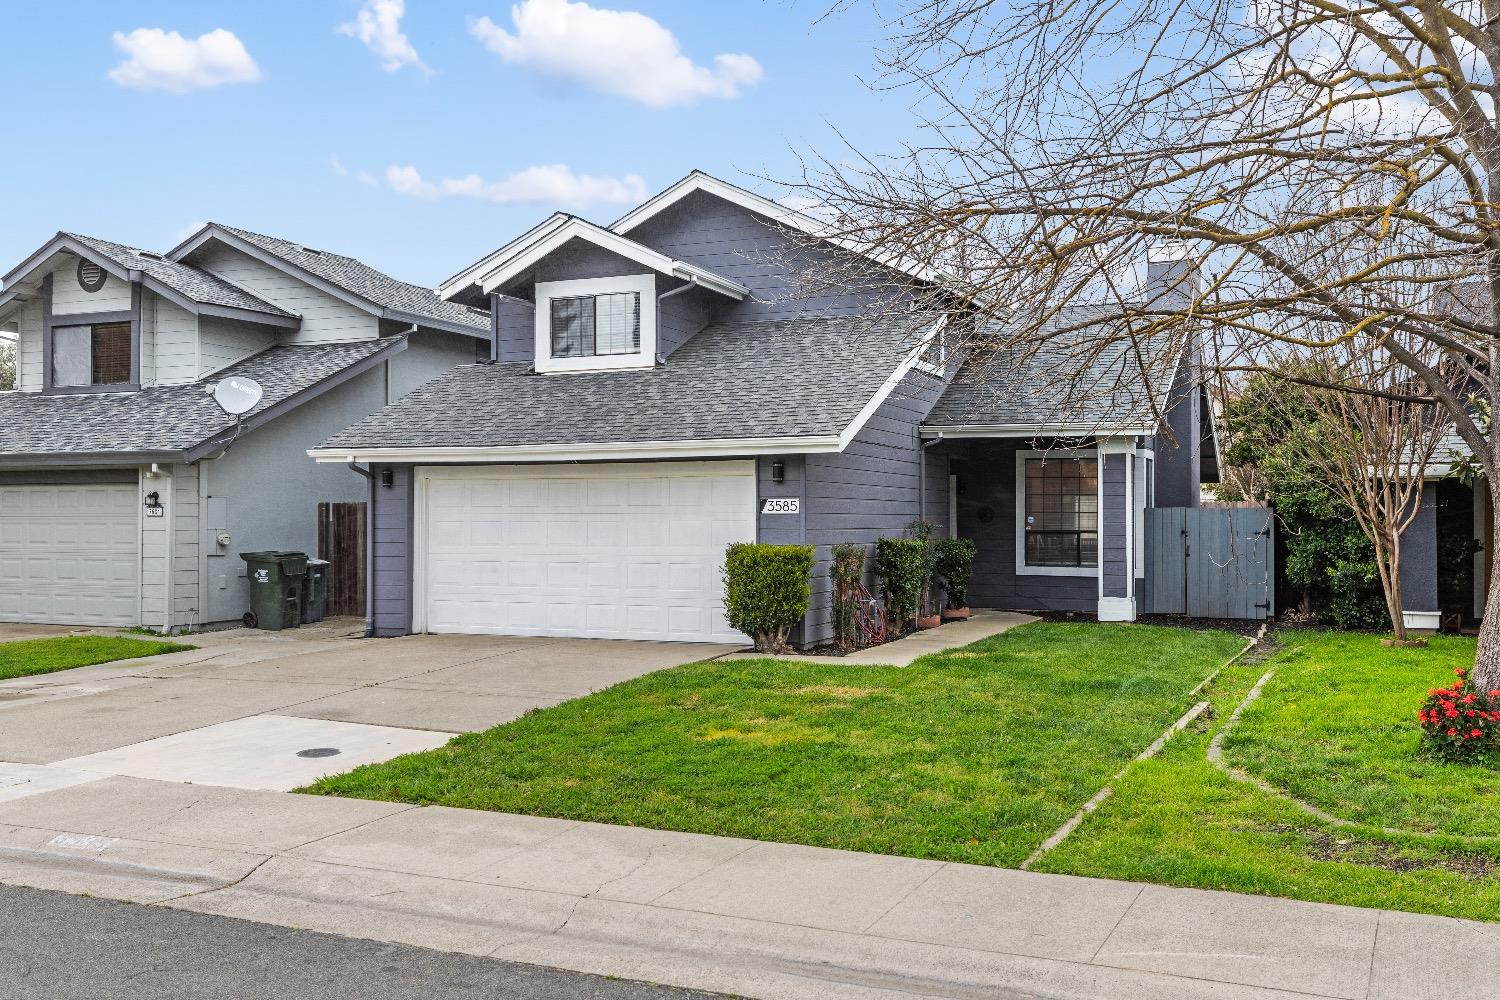 Welcome home to 3585 Rio Pacifica Way Sacramento CA. This home has everything you need to plant some